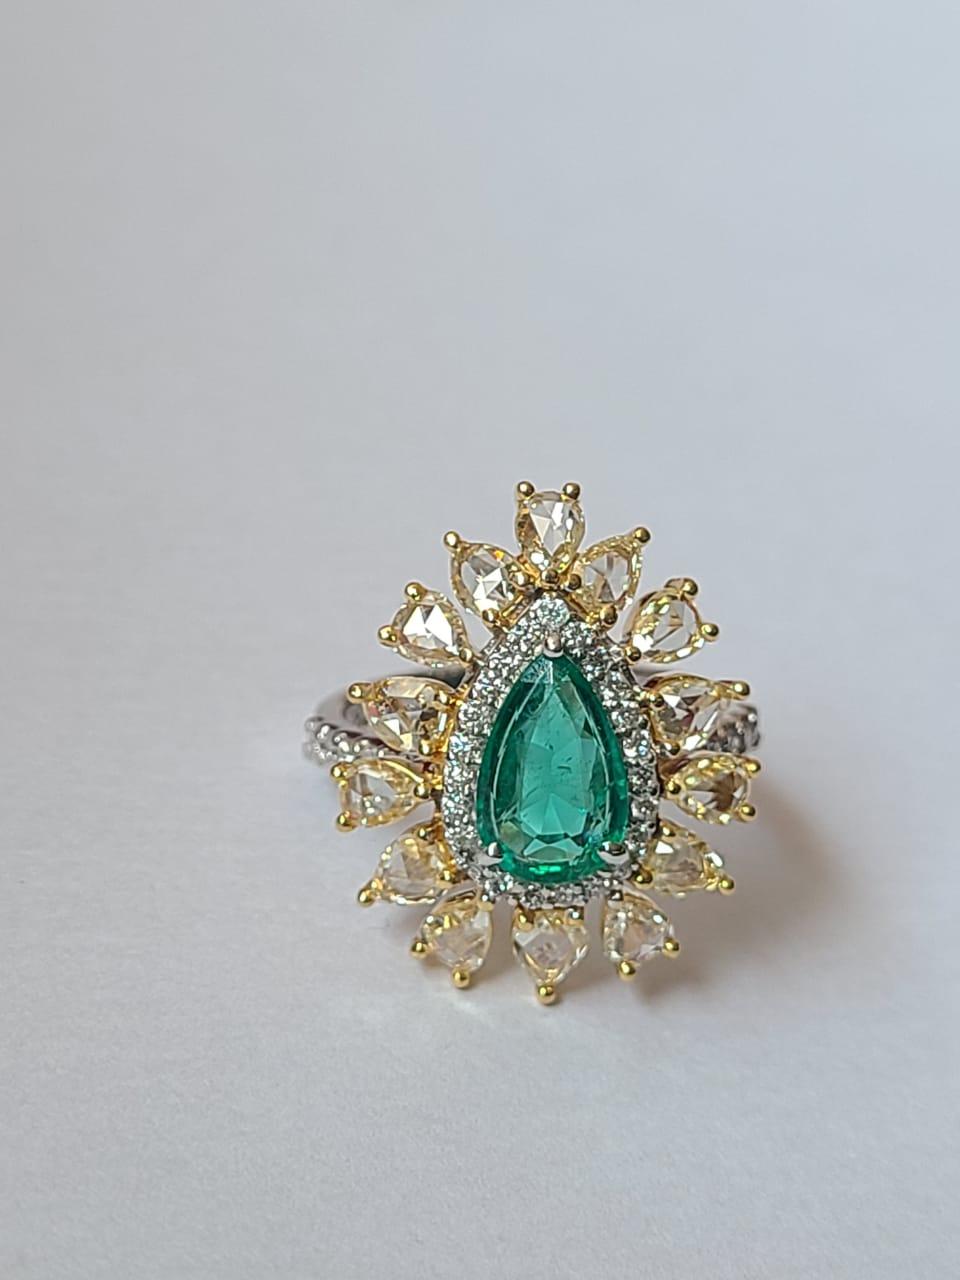 Natural Zambian Emerald & Rose Cut Diamonds Engagement Ring Set in 18K Gold For Sale 2